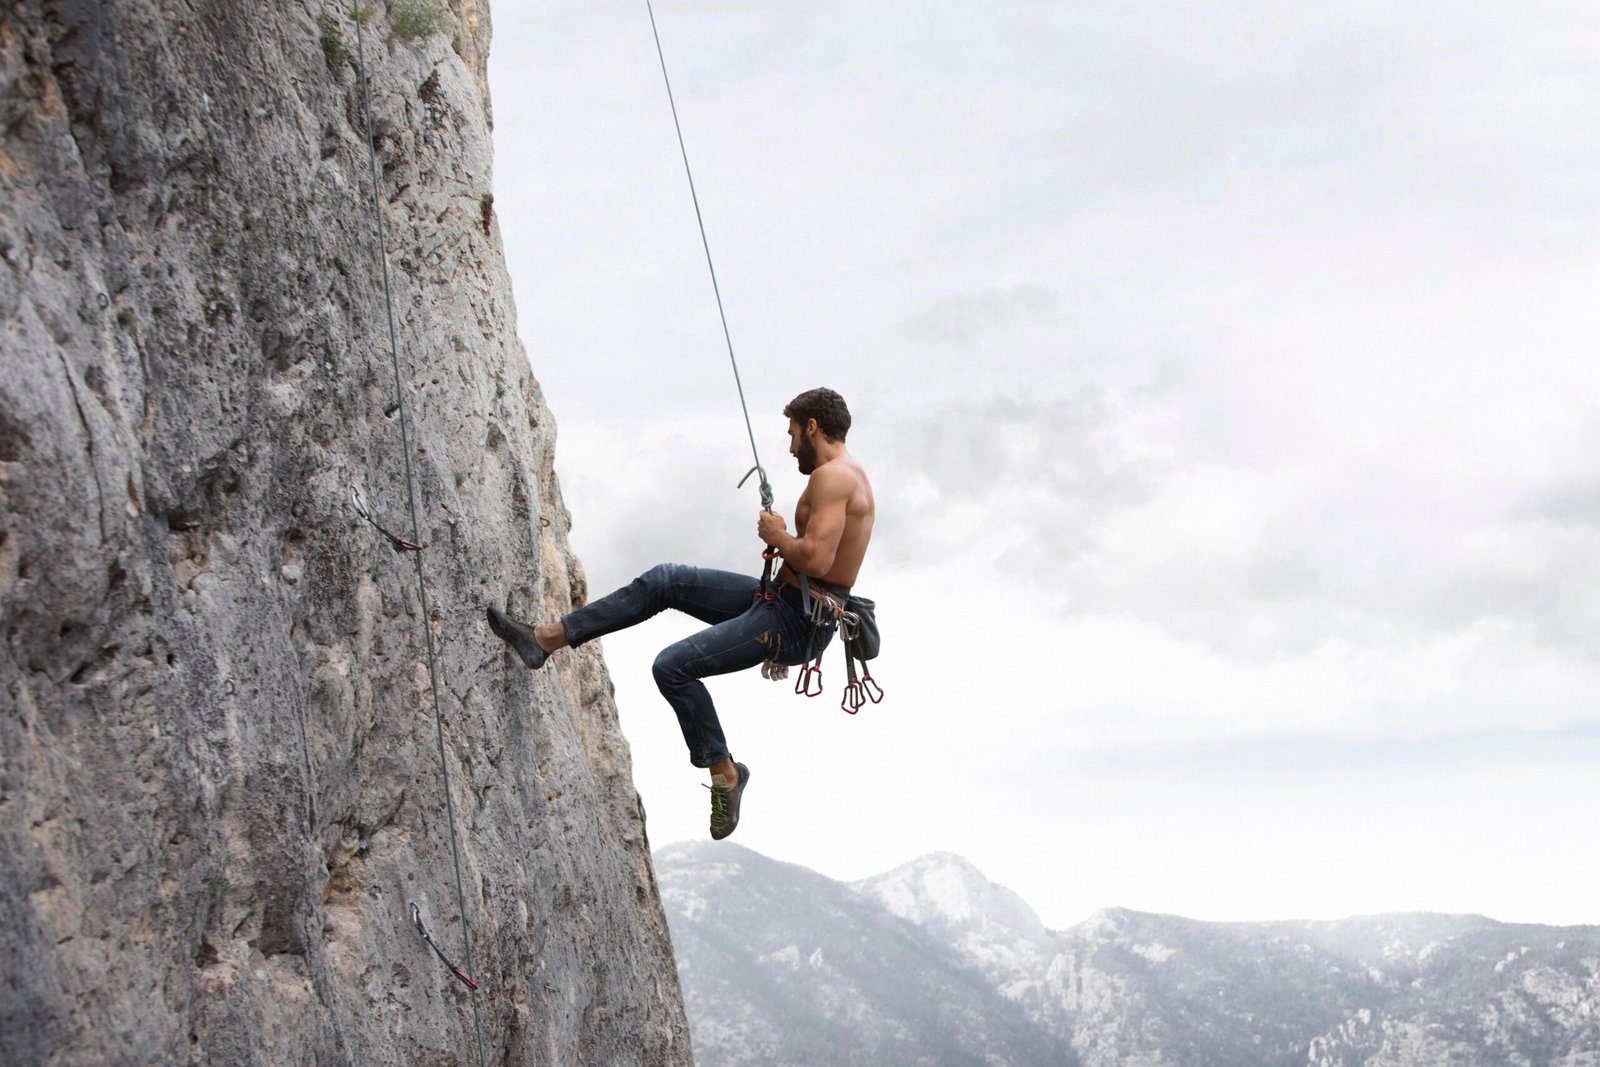 strong man climbing mountain with safety equipment scaled